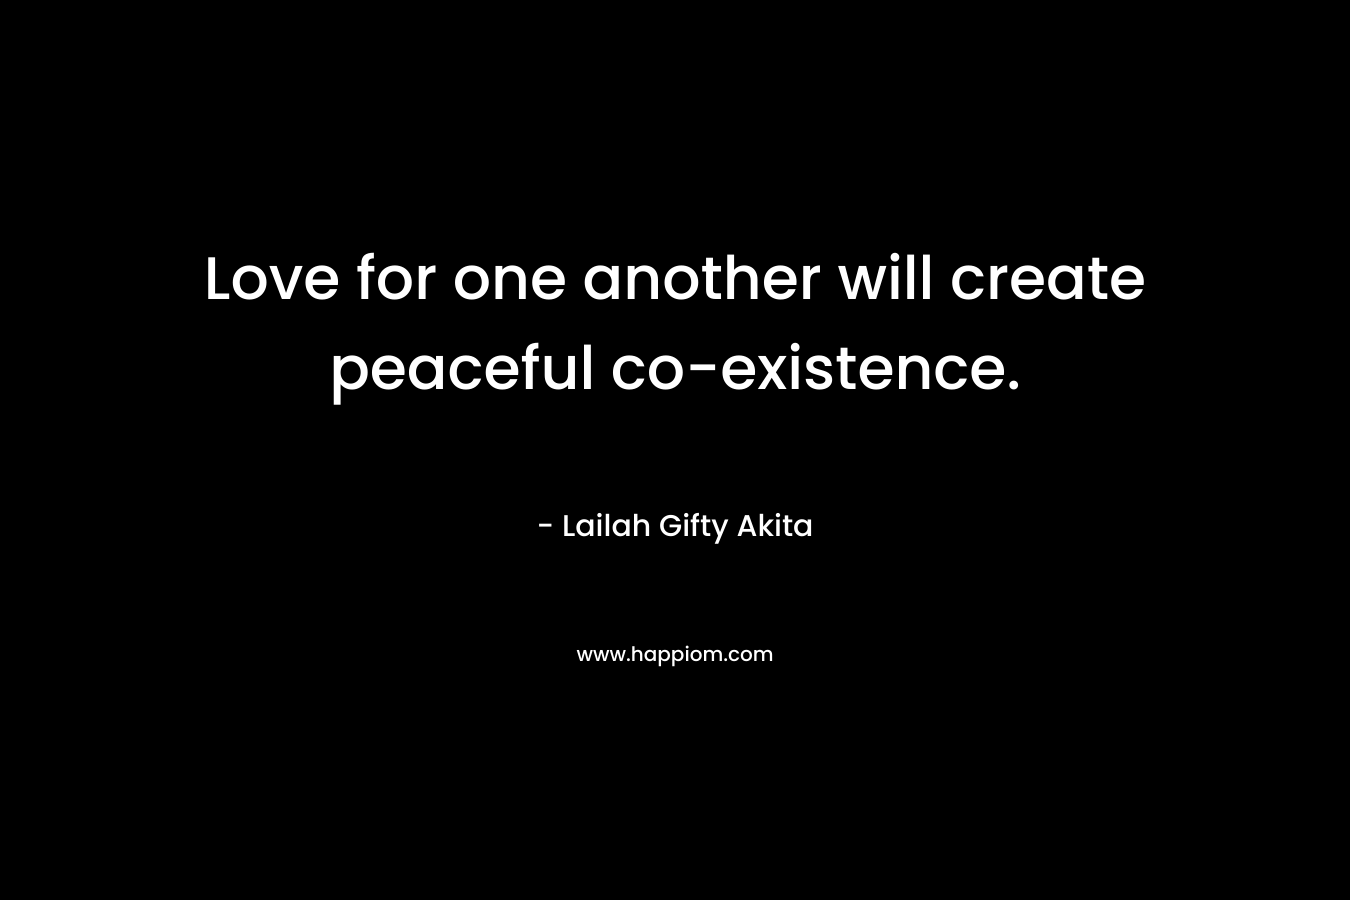 Love for one another will create peaceful co-existence. – Lailah Gifty Akita